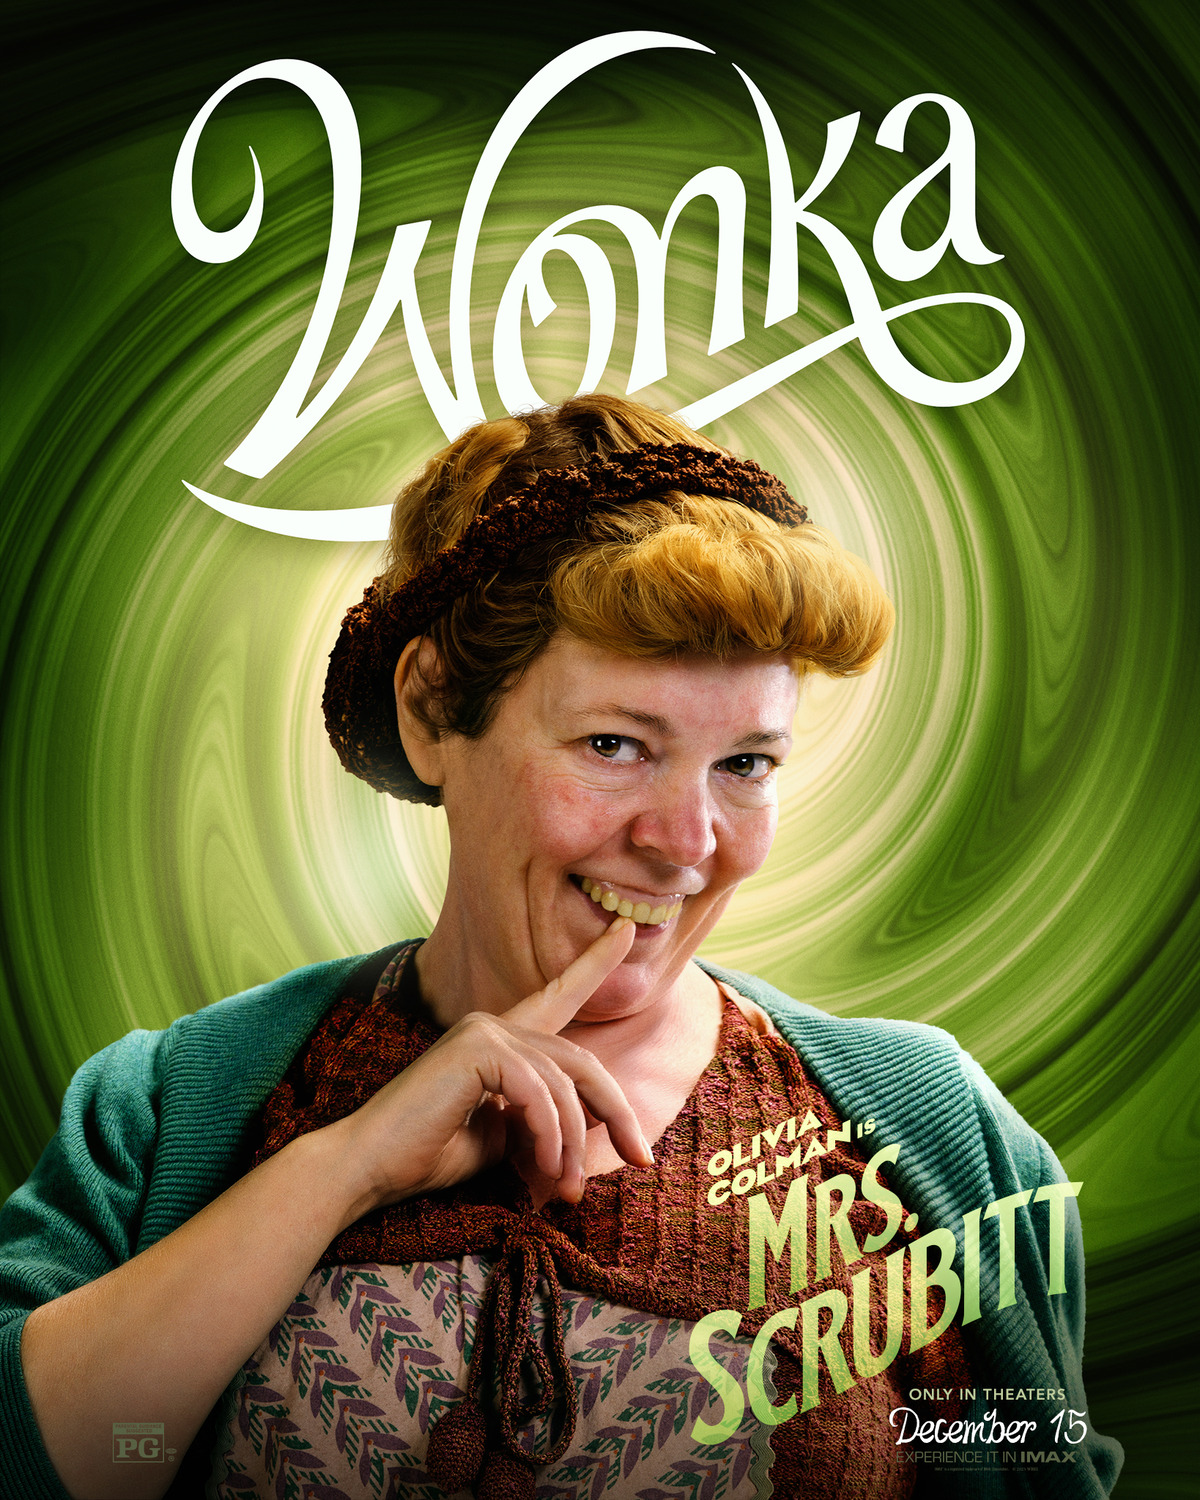 Extra Large Movie Poster Image for Wonka (#13 of 22)